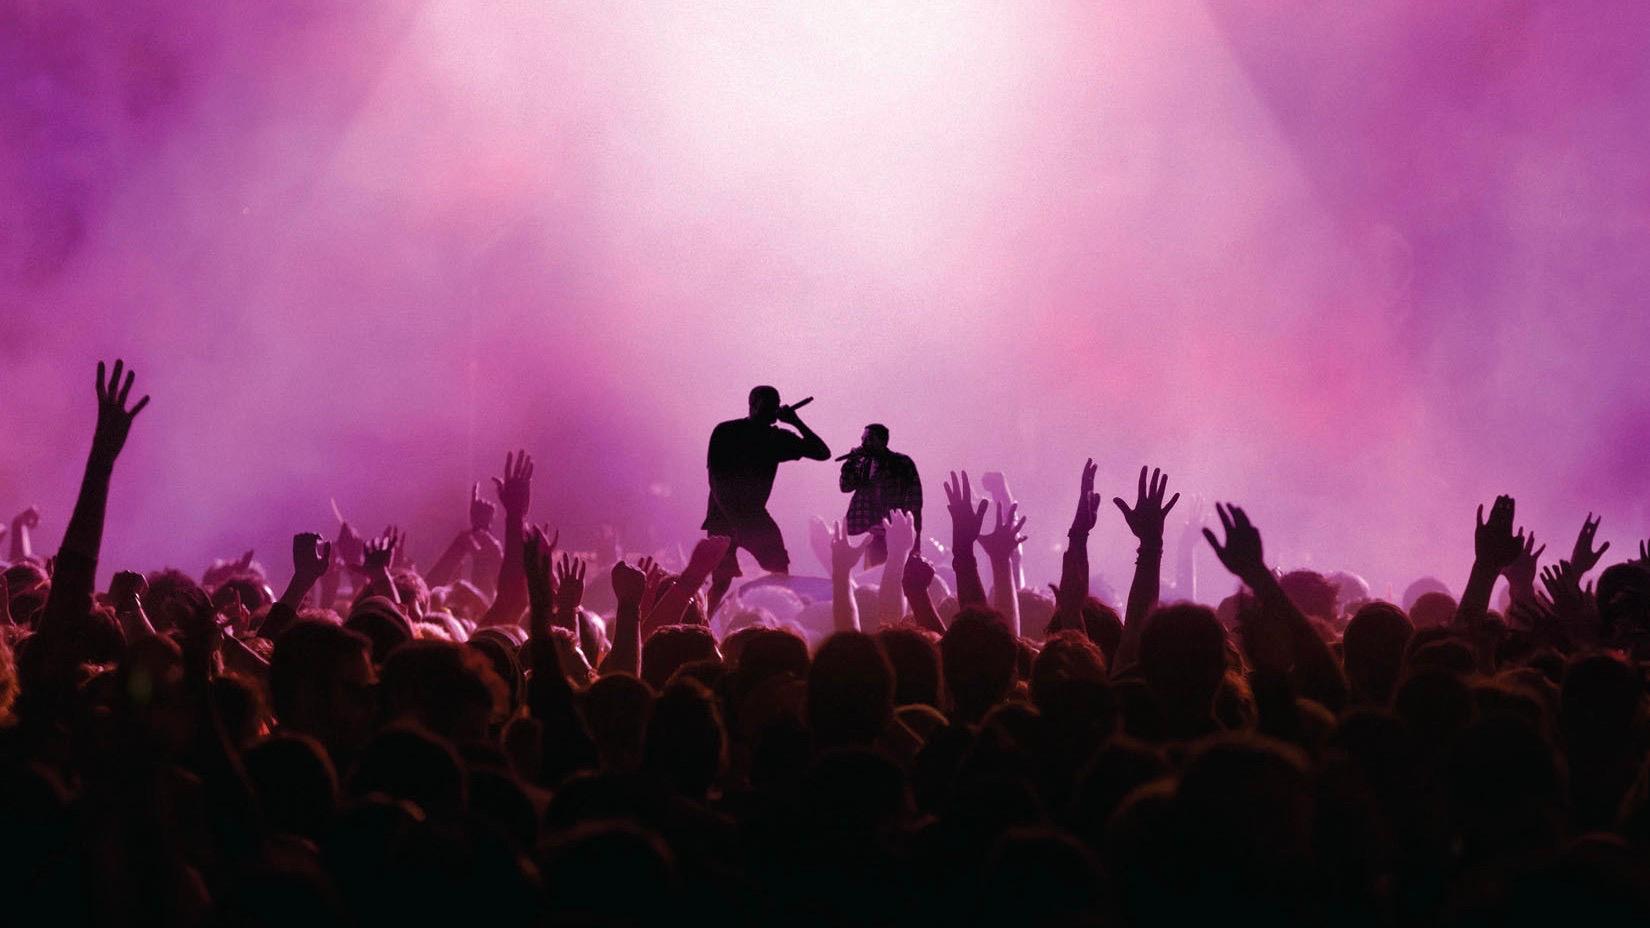 Maroon silhouette of two people performing in front of a crowd of people